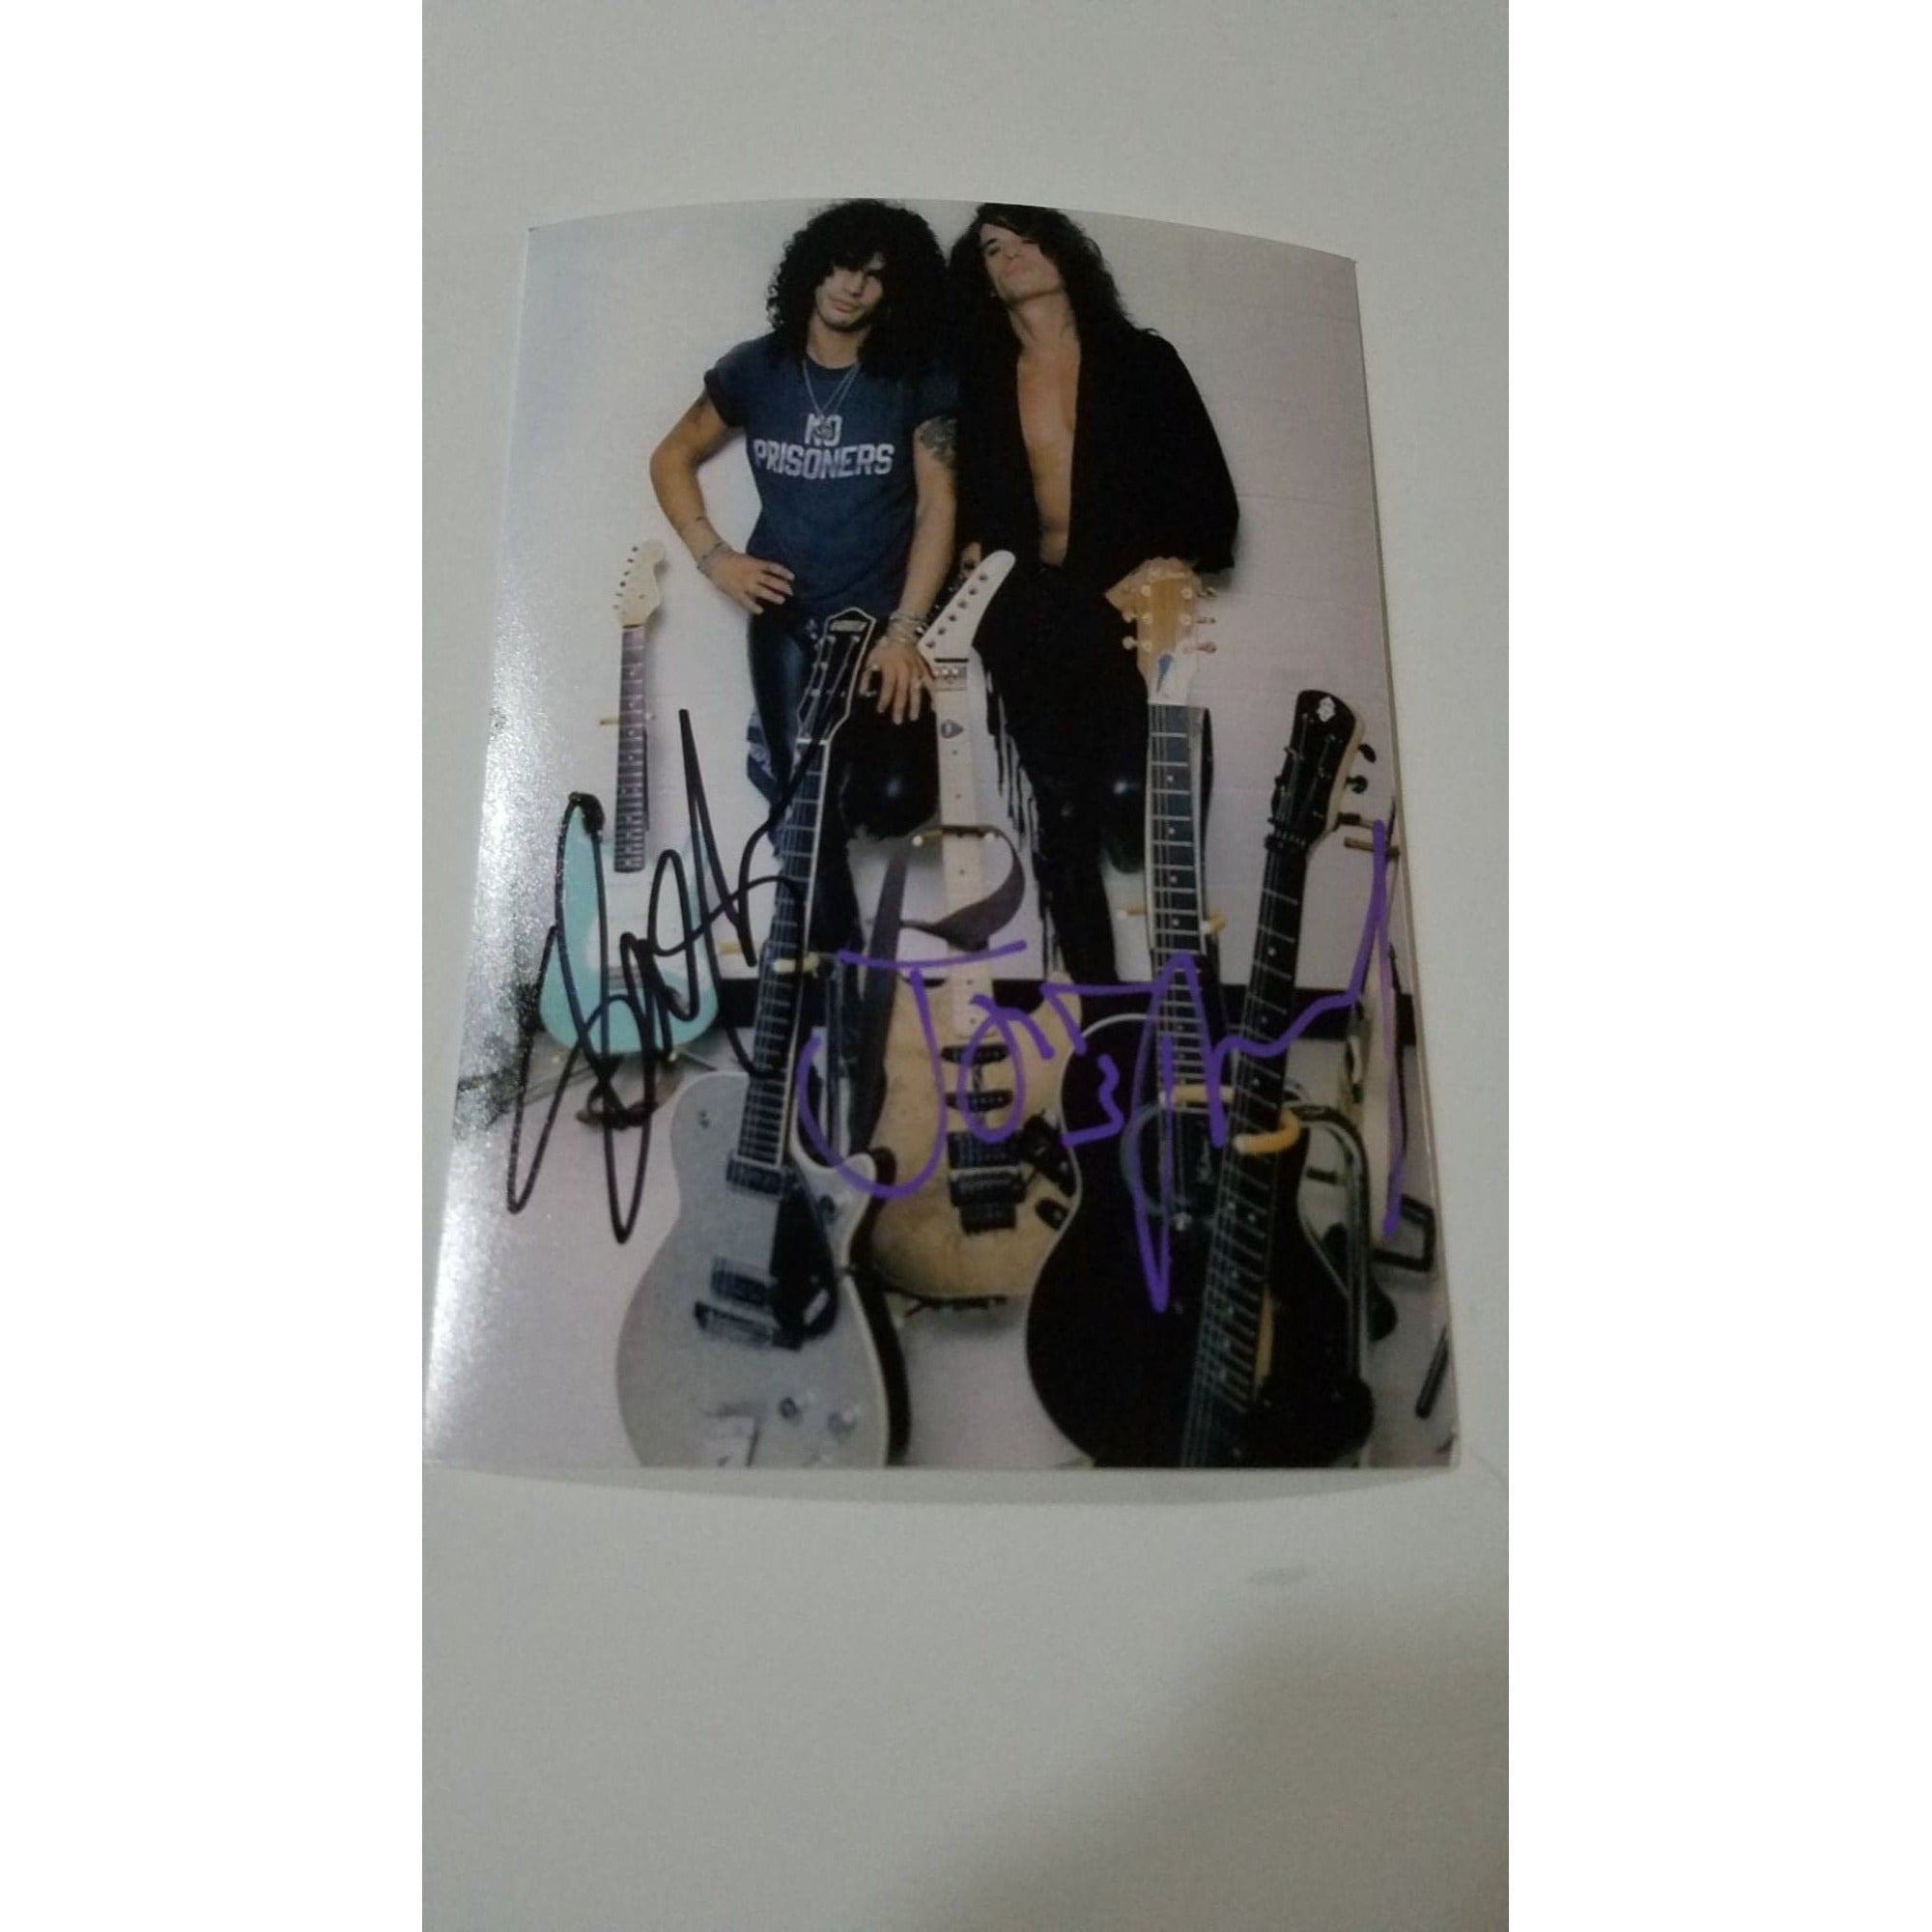 Slash of Guns and Roses and Joe Perry 5 x 7 photo by 7 photo signed